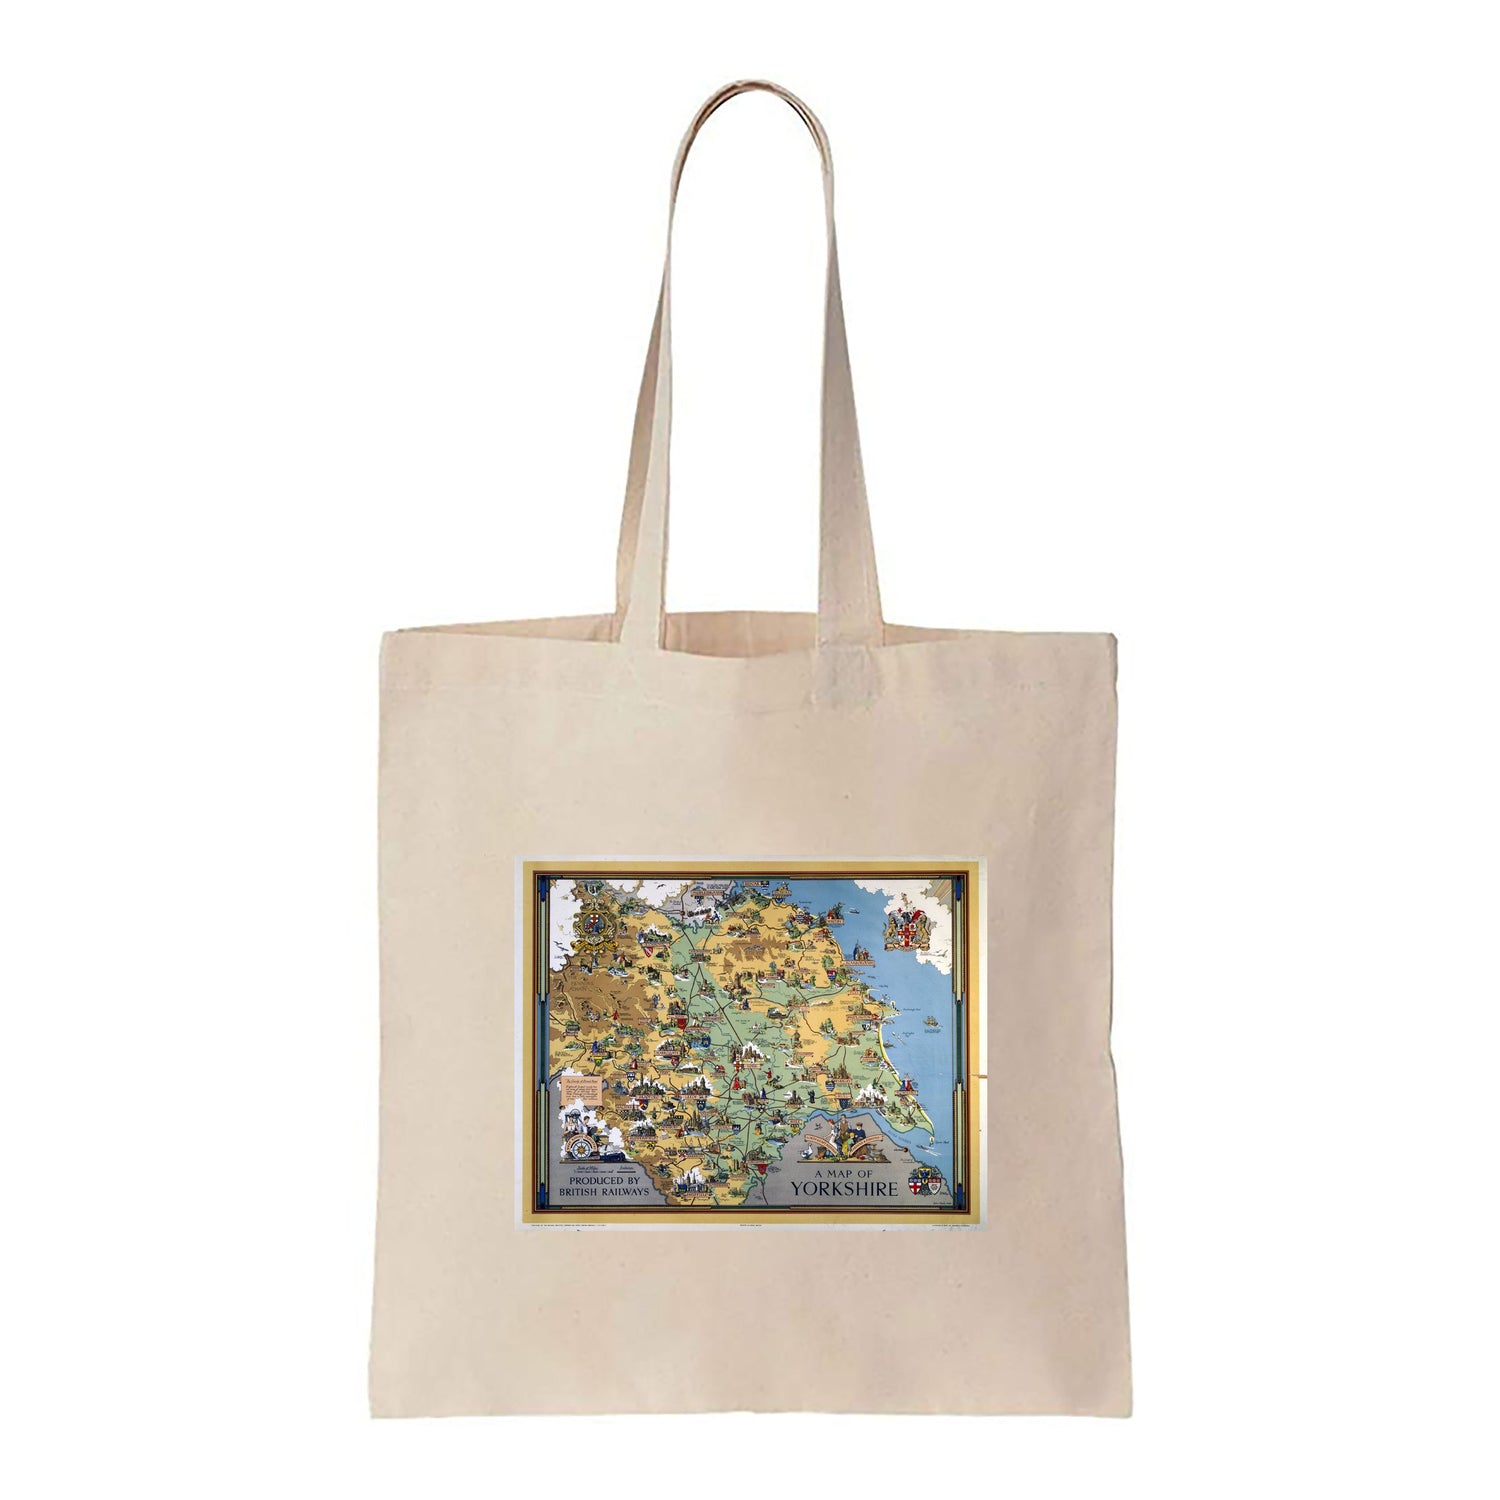 A Map Of Yorkshire, Produced By British Railways - Canvas Tote Bag